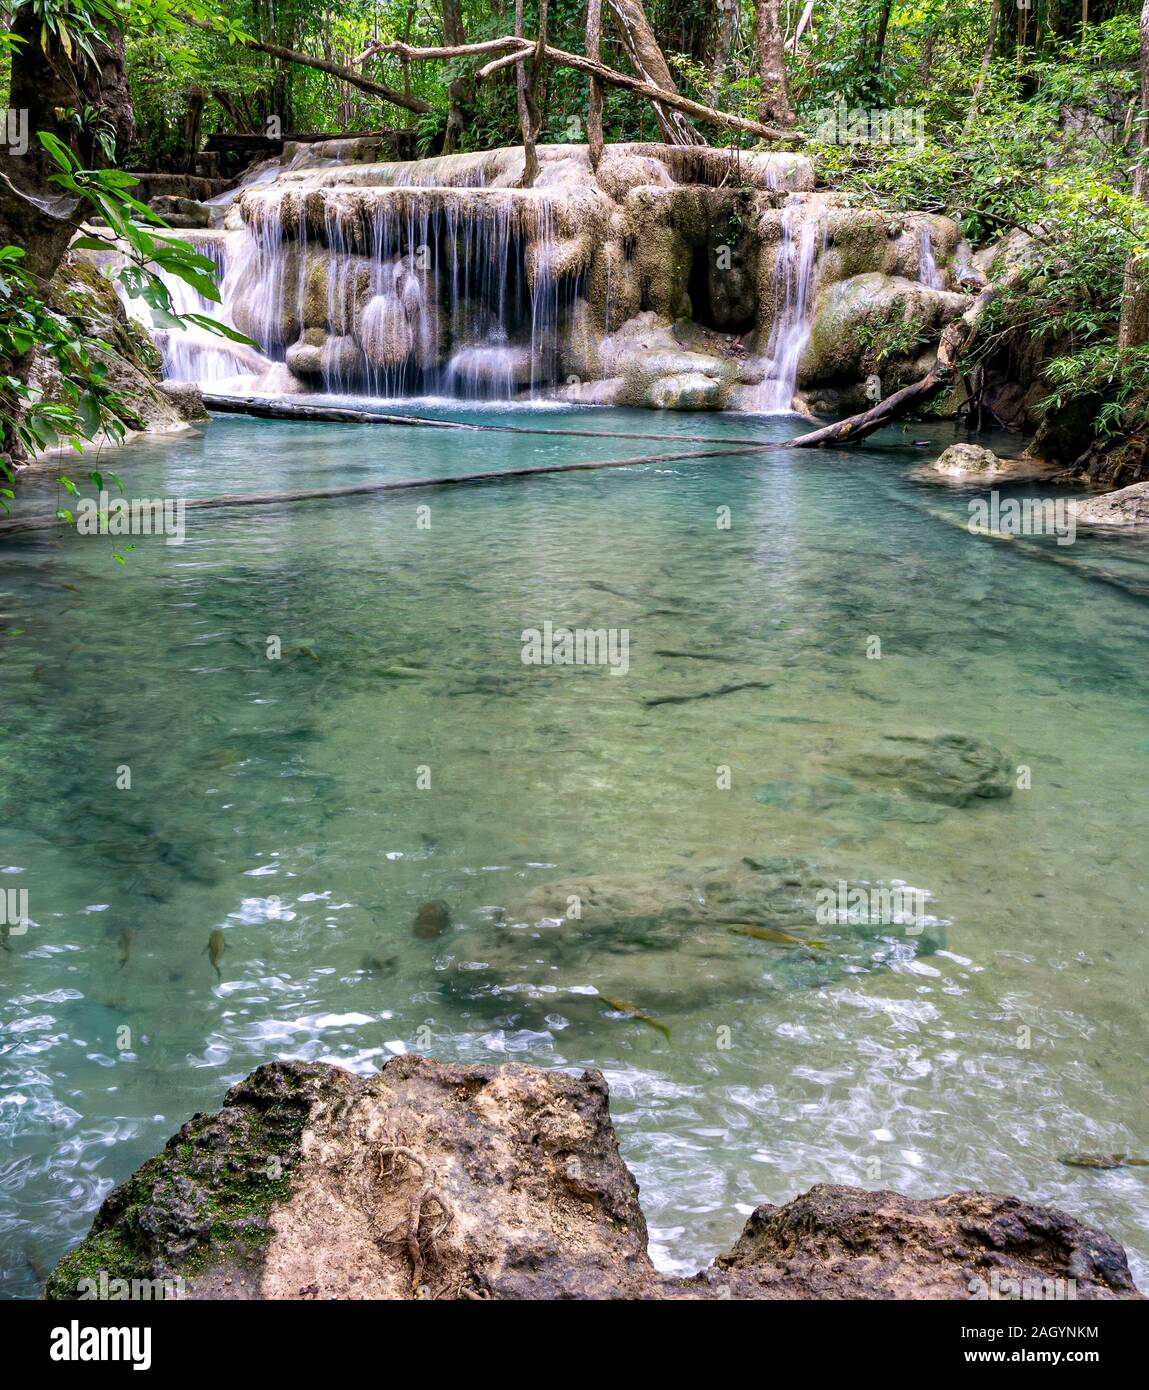 Clean green emerald water from the waterfall Surrounded by small trees - large trees,  green colour, Erawan waterfall, Kanchanaburi province, Thailand Stock Photo